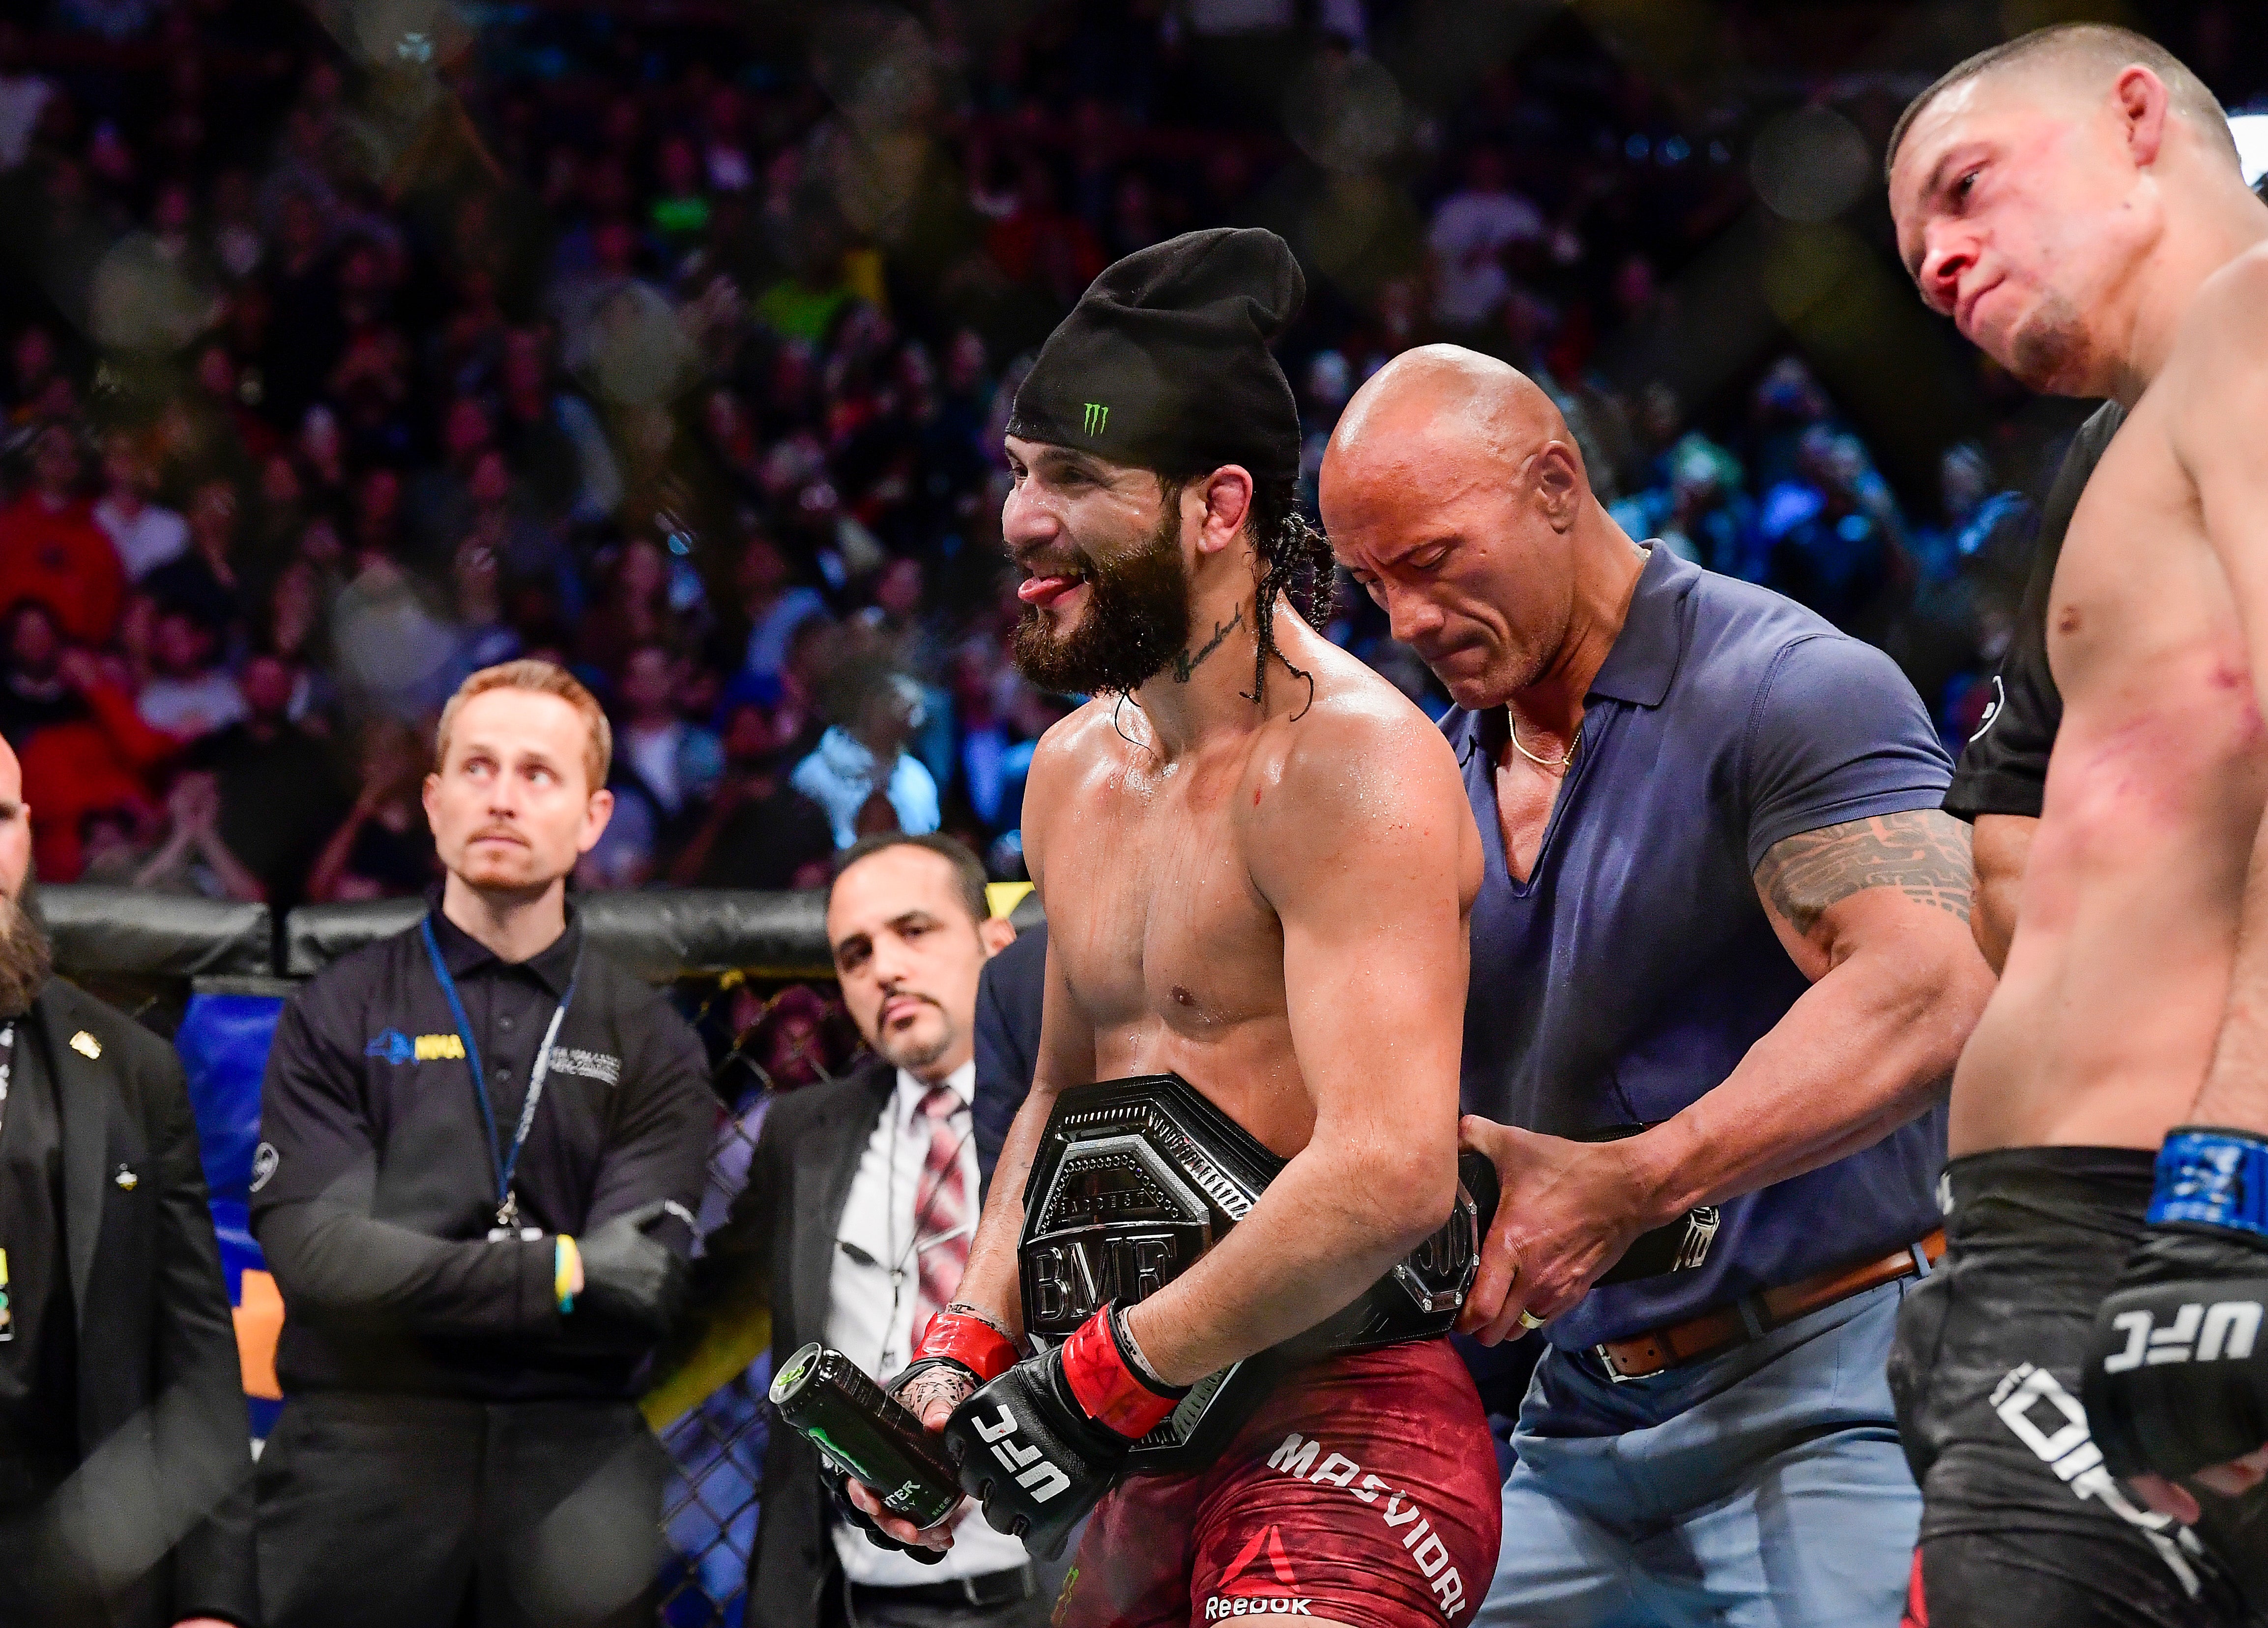 ‘The Rock’ presents Masvidal with the ‘BMF’ belt after ‘Gamebred’ beats Nate Diaz in November 2019